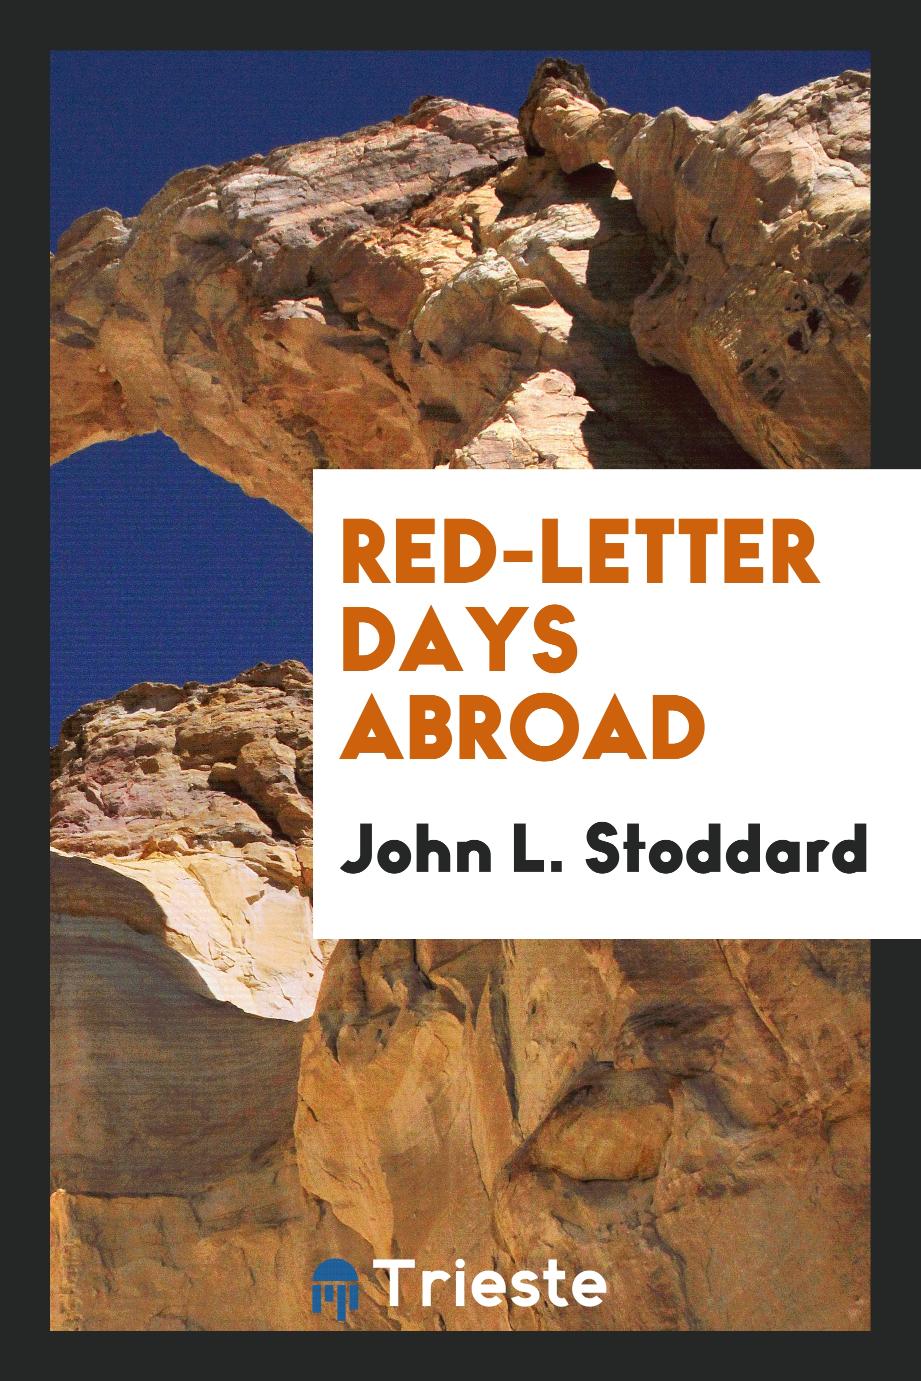 Red-letter days abroad